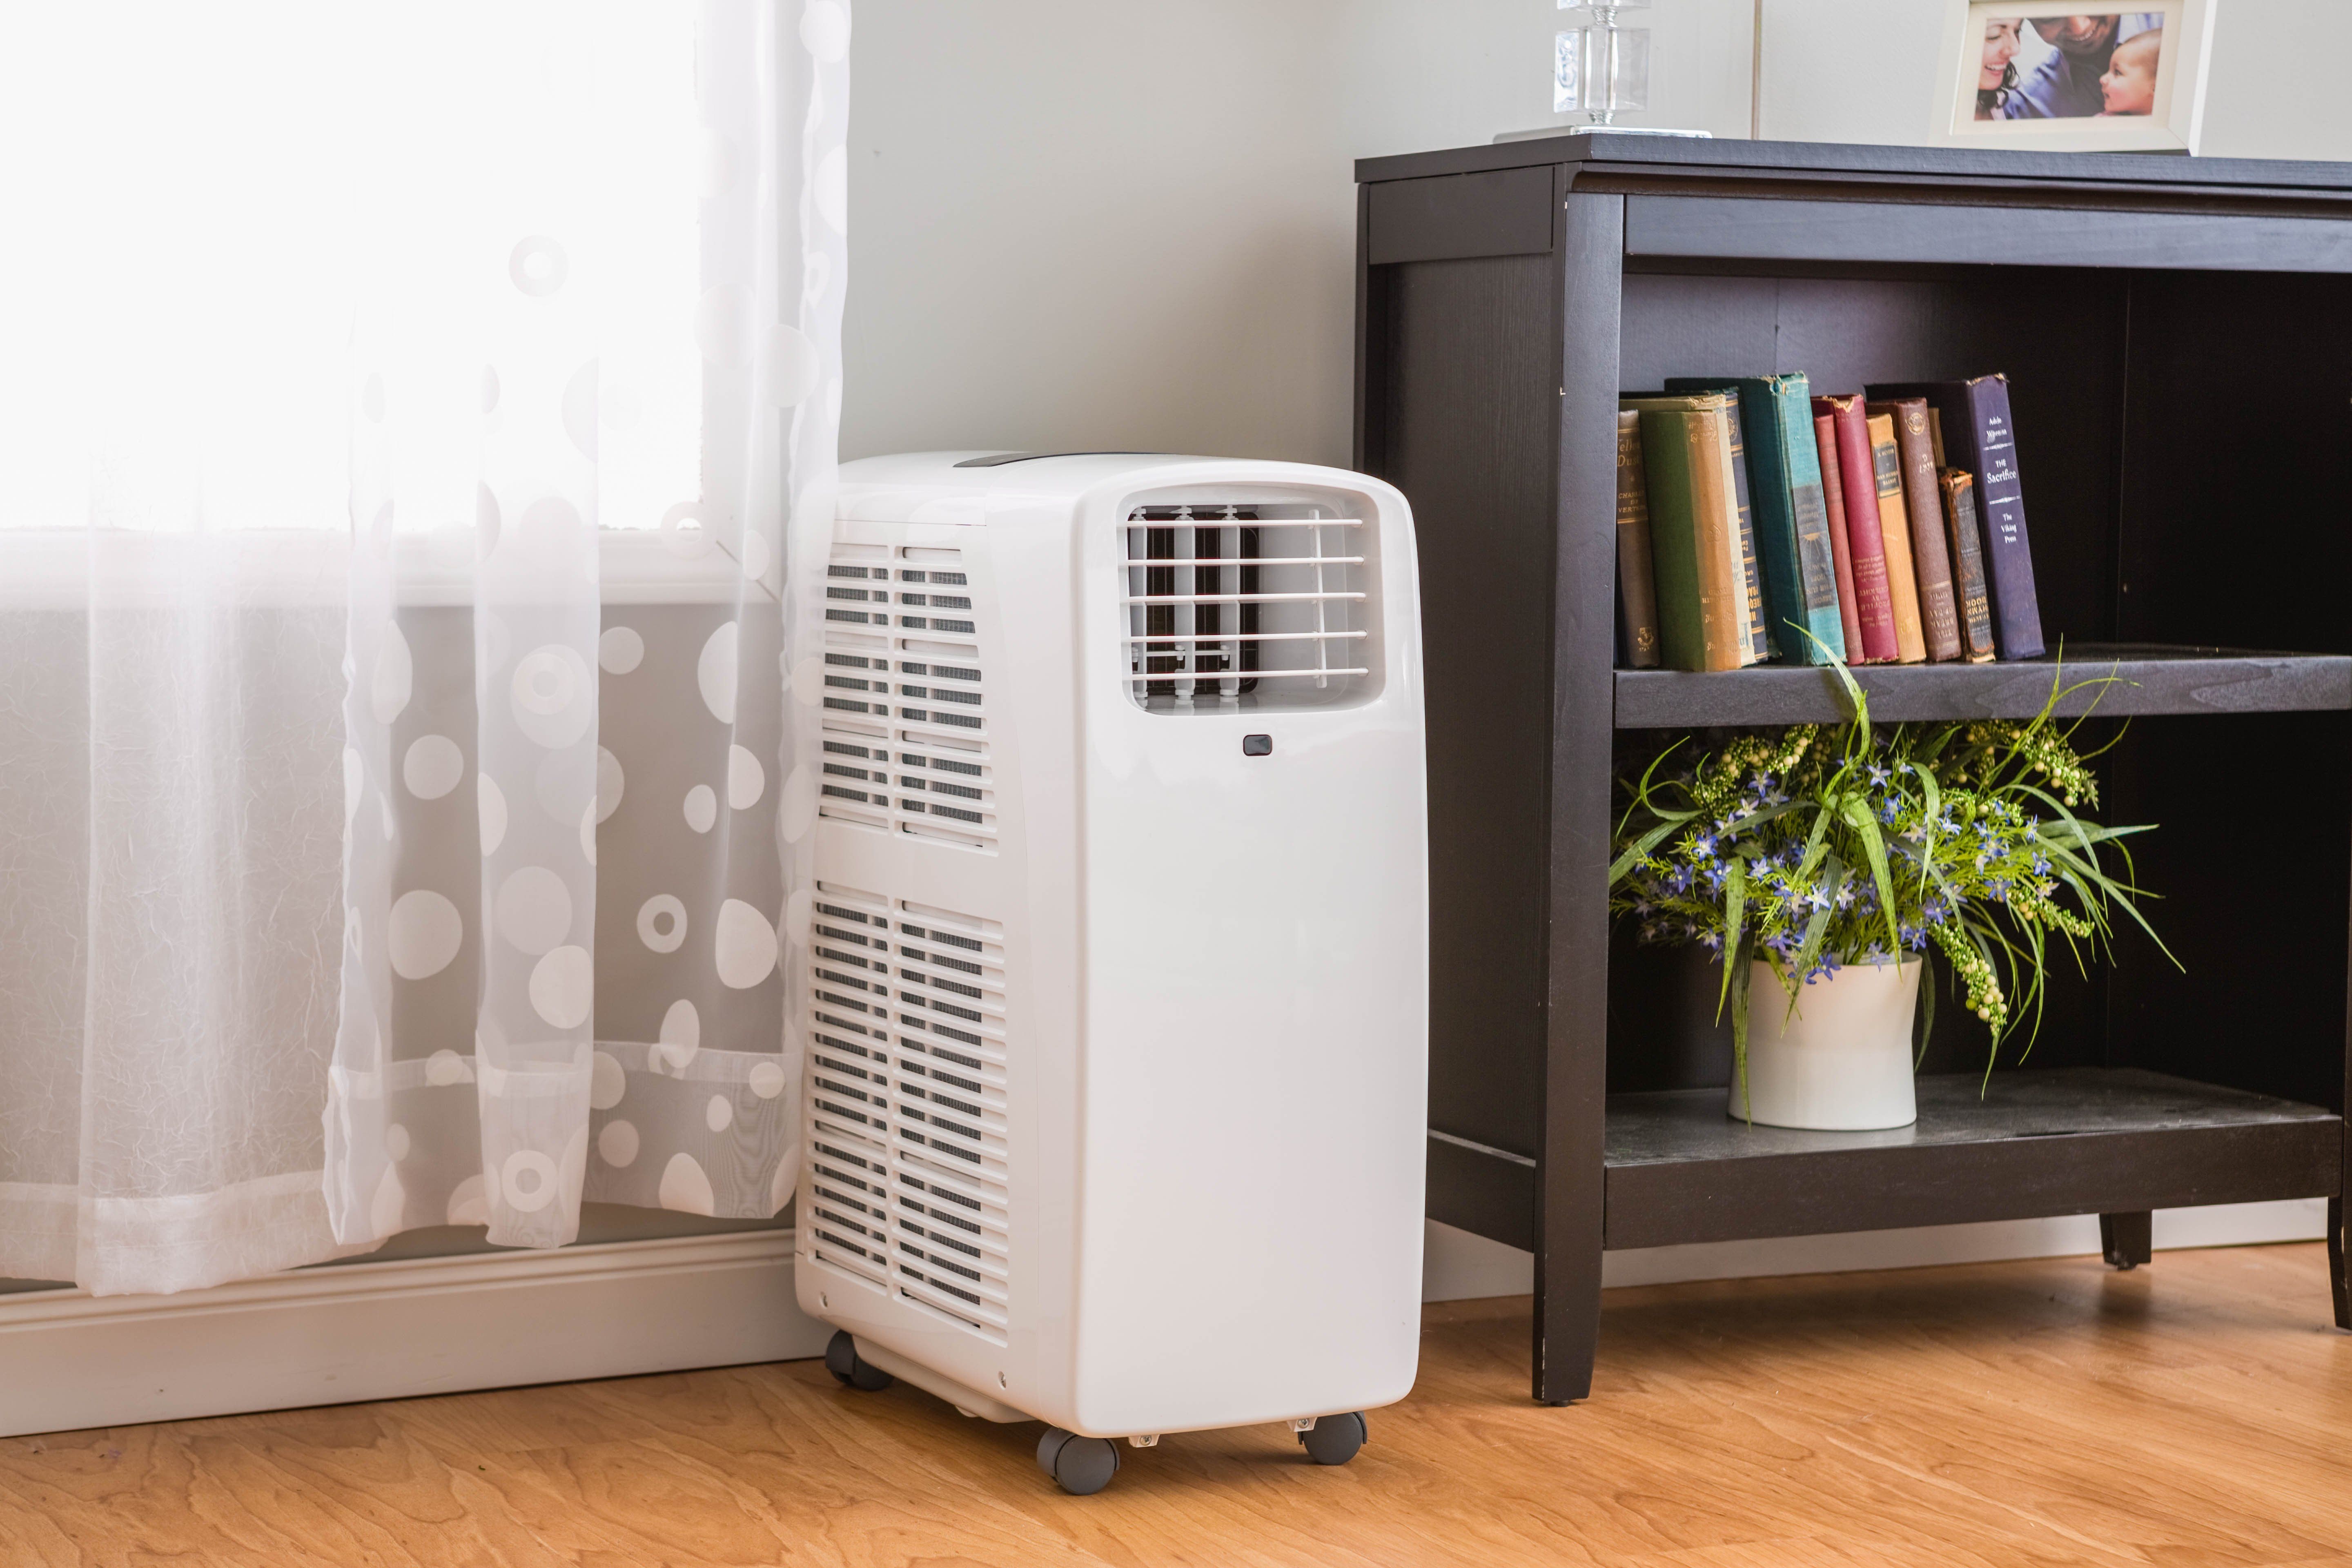 Best Small Dehumidifier For Living Room